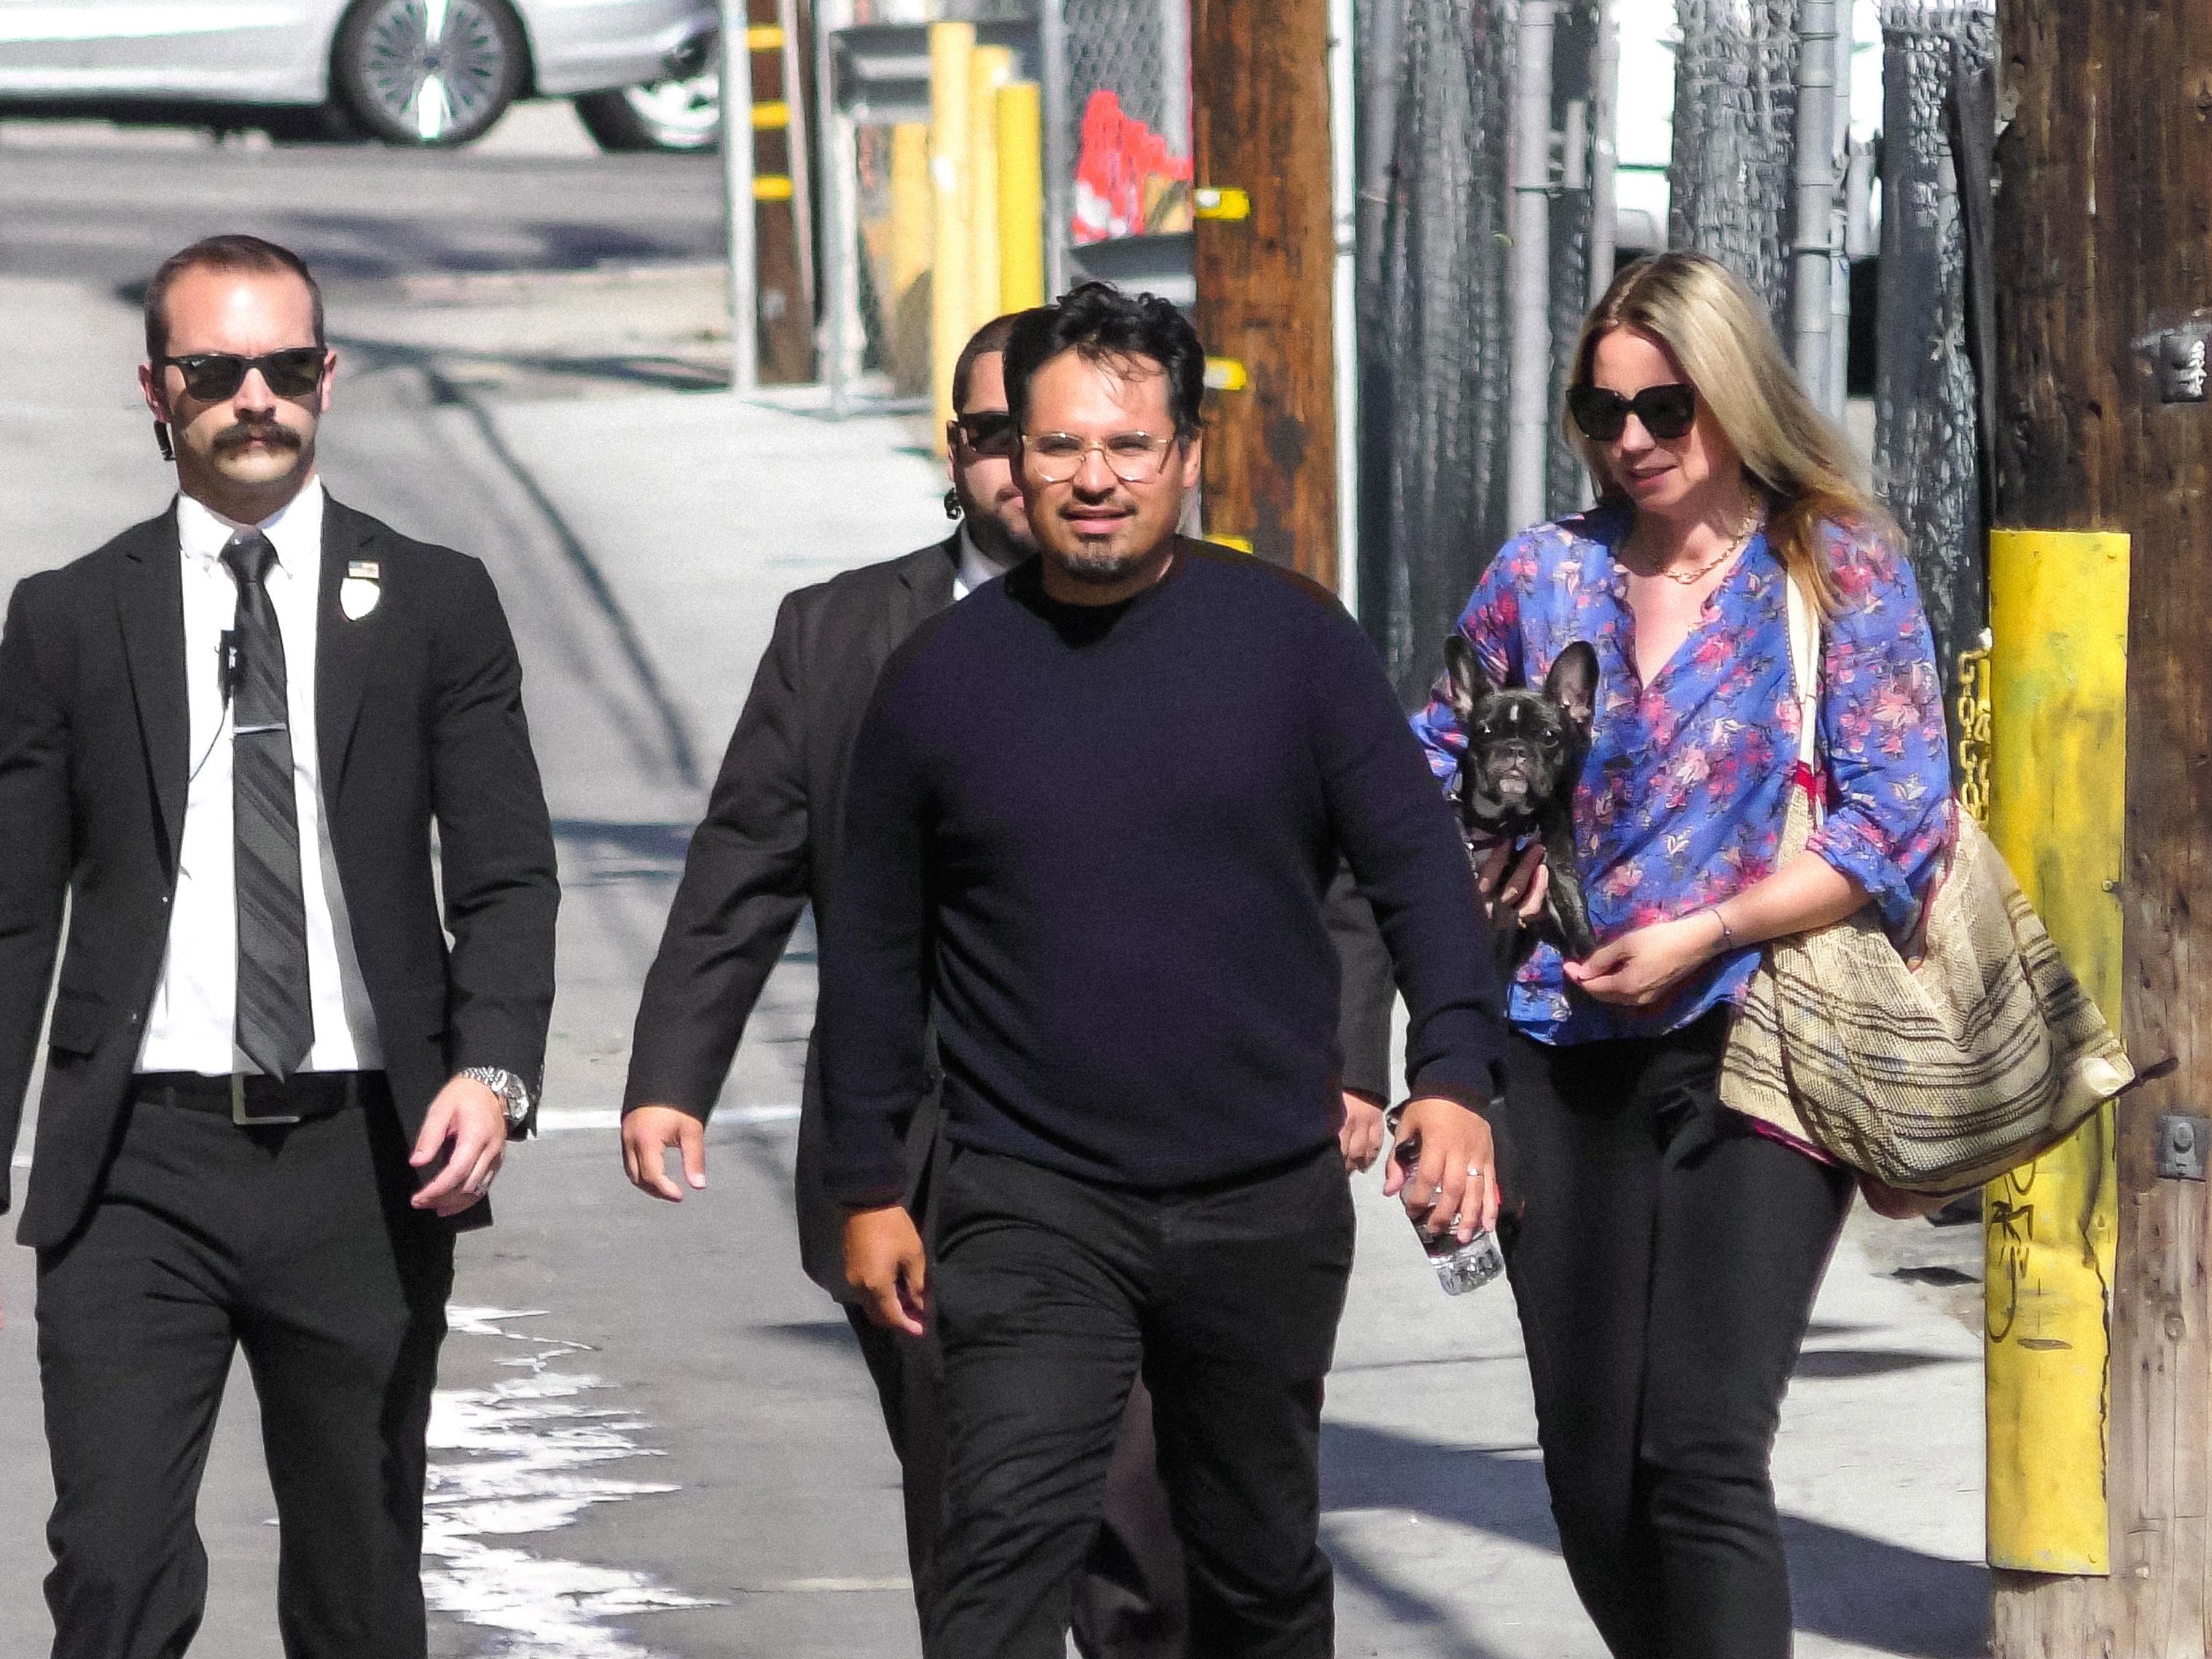 Michael Peña and Brie Shaffer are seen arriving at “Jimmy Kimmel Live” on July 29, 2019 in Los Angeles, California. | Source: Getty Images